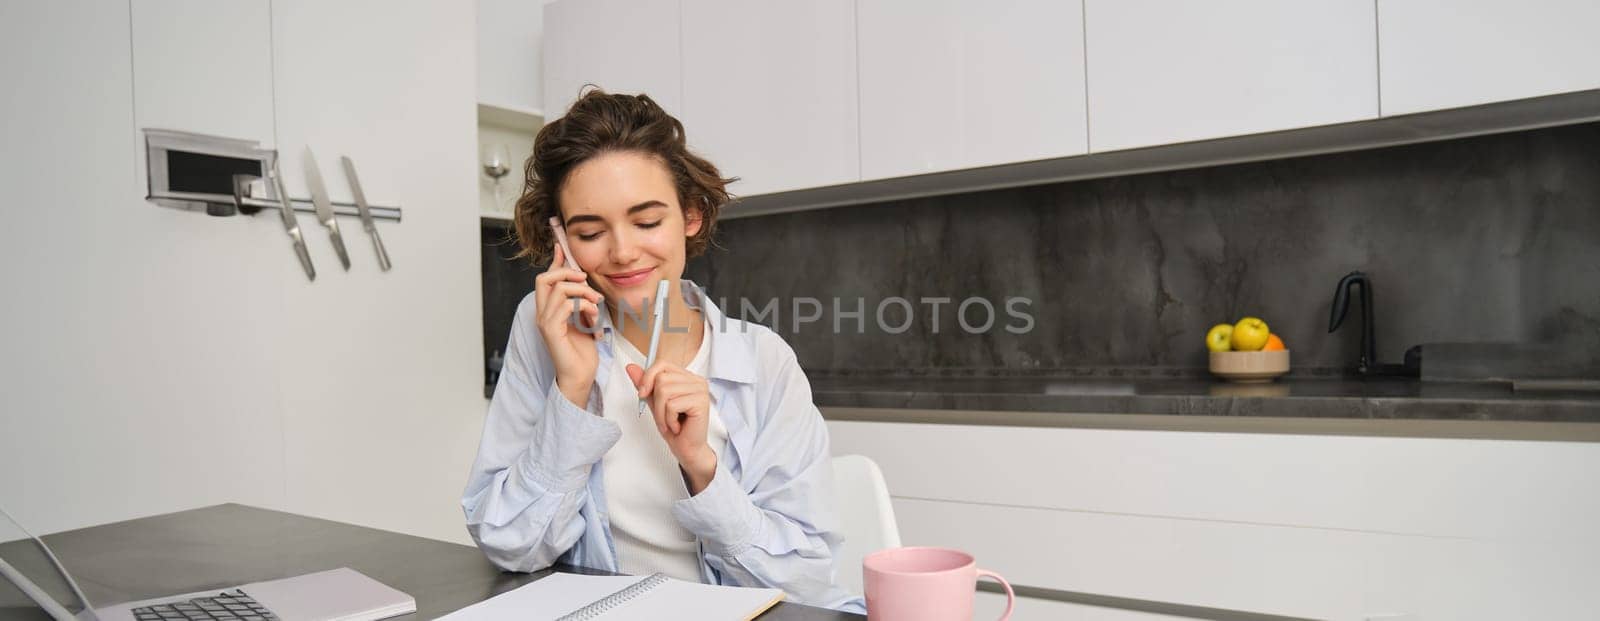 Image of woman working at home, making a phone call, sitting with smartphone, surrounded with paperwork, doing homework and talking to someone.